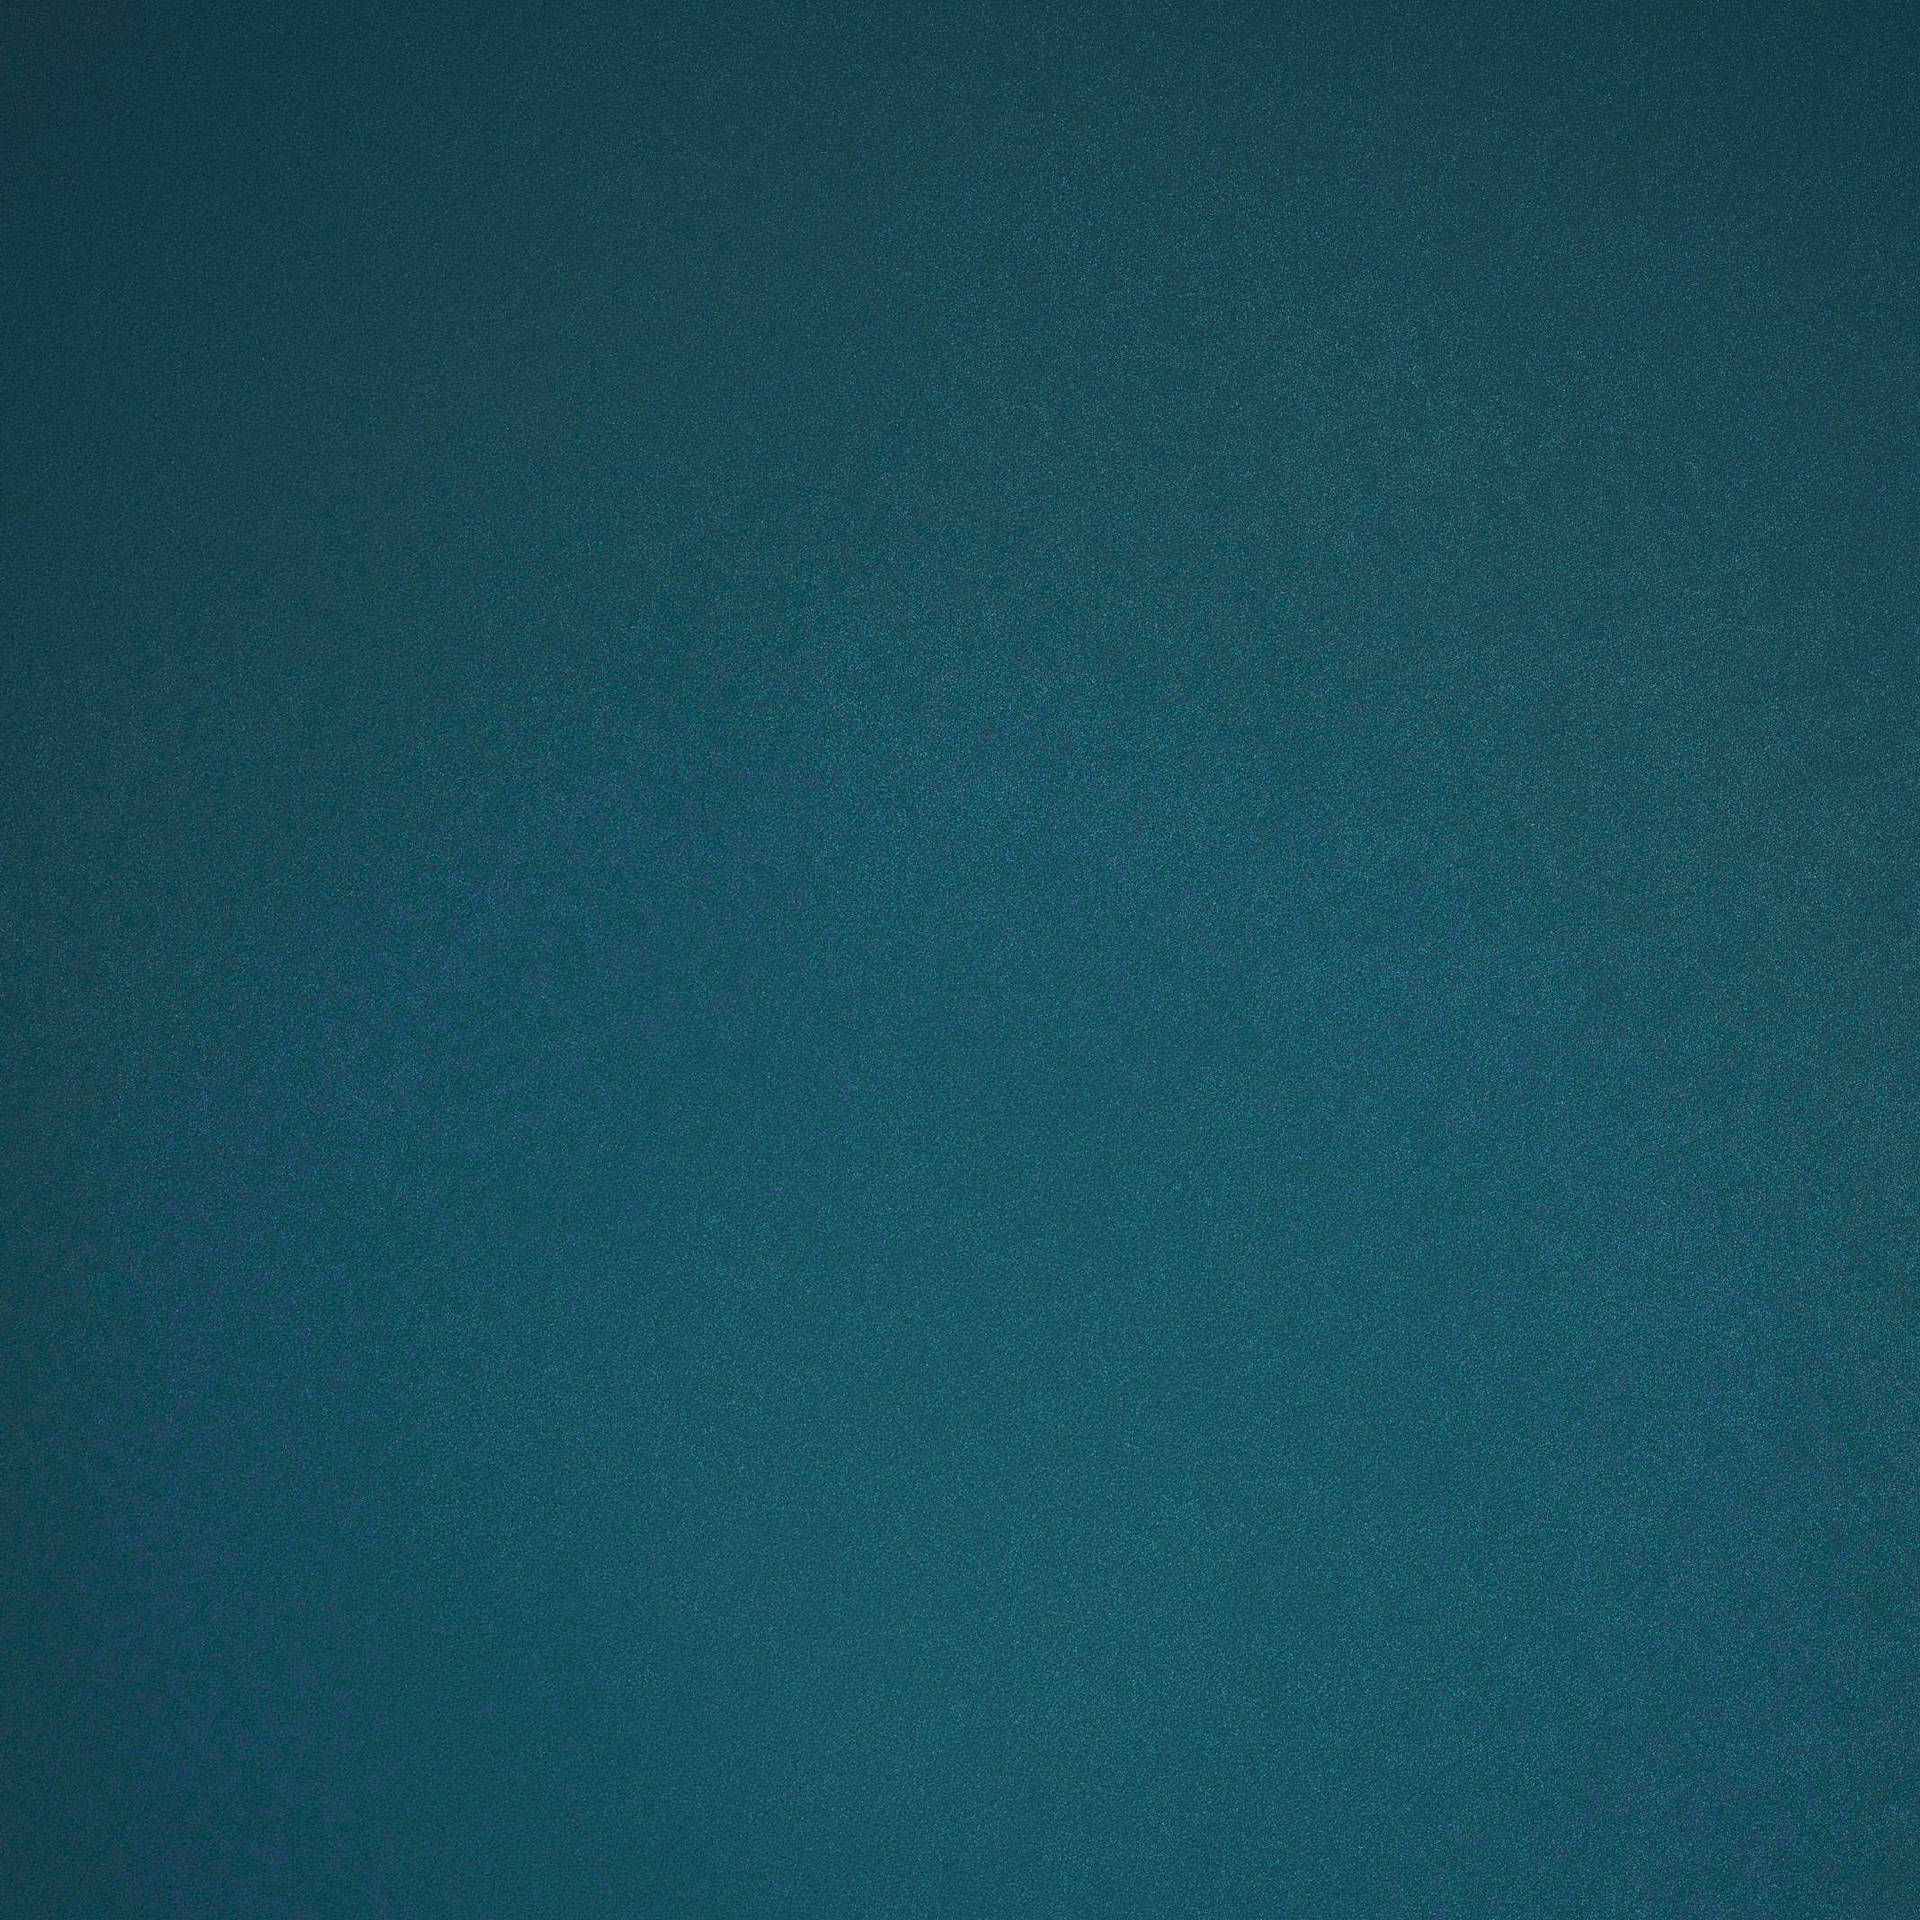 Rough Green Blue Texture Background